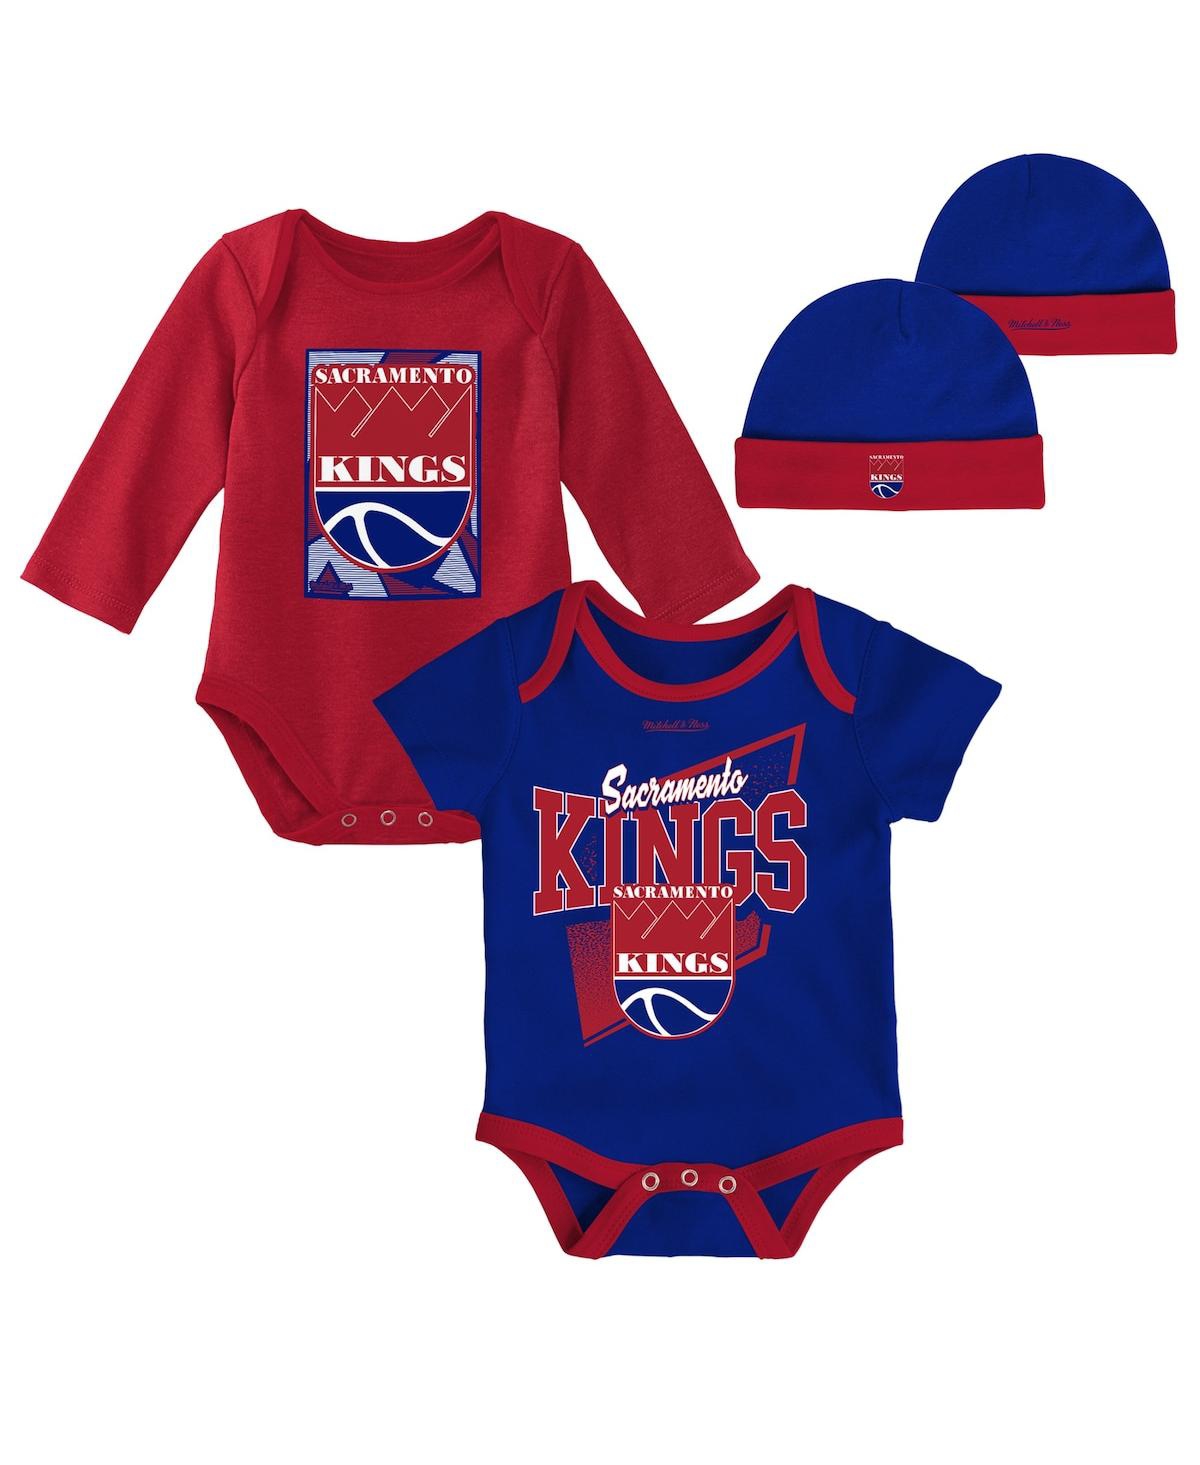 MITCHELL & NESS NEWBORN AND INFANT BOYS AND GIRLS MITCHELL & NESS BLUE, RED SACRAMENTO KINGS 3-PIECE HARDWOOD CLASSI